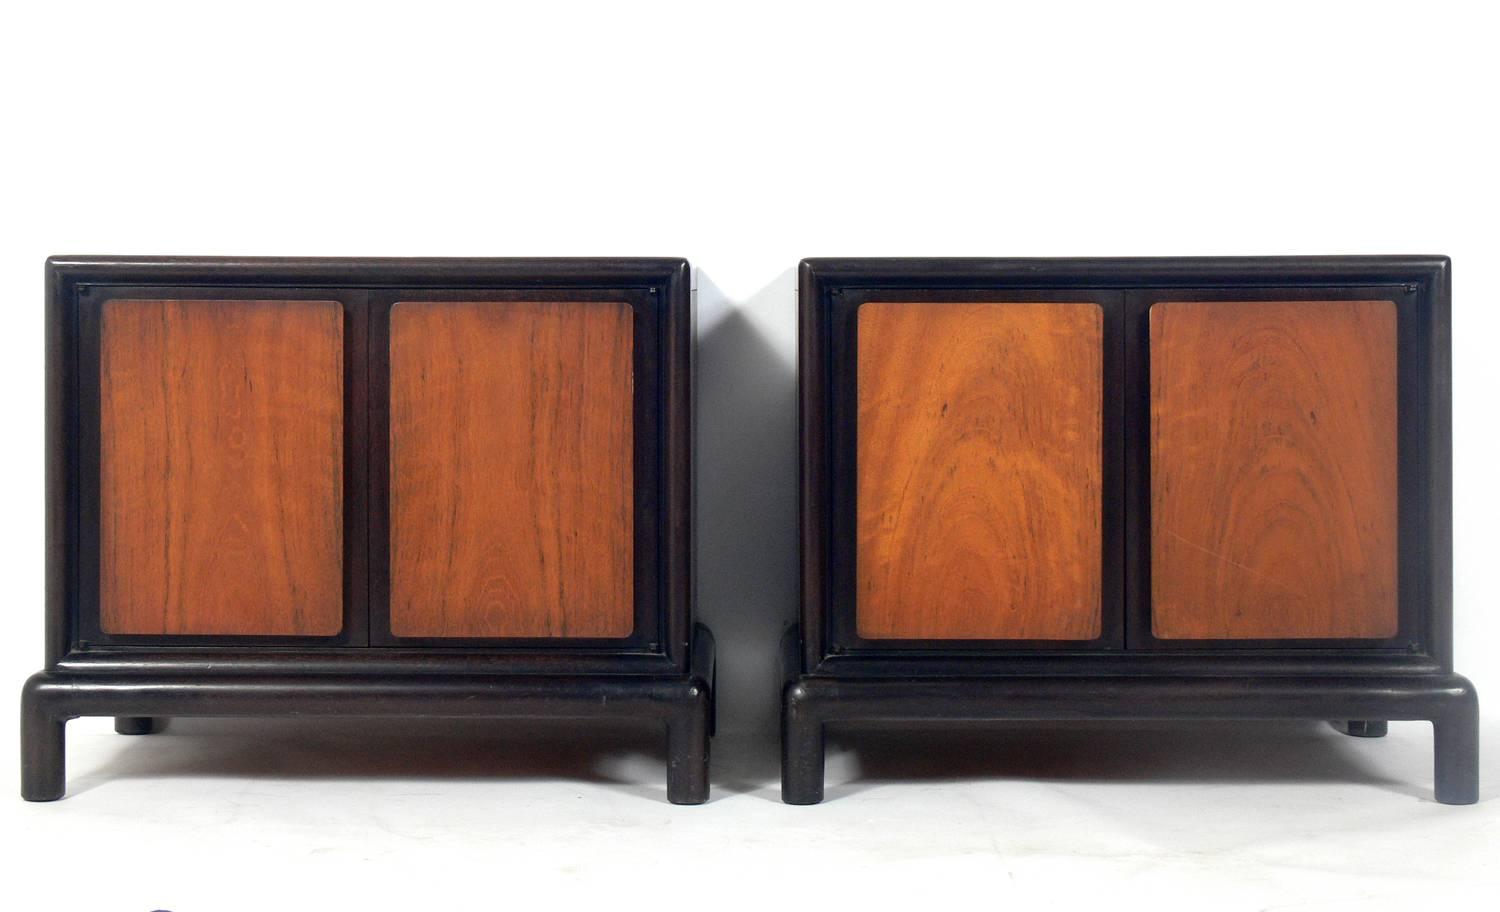 Pair of Nightstands in the manner of T.H. Robsjohn Gibbings, American, circa 1960s. These night stands are currently being refinished and can be completed in your choice of color. They could be two tone as they currently are, or one solid color. The